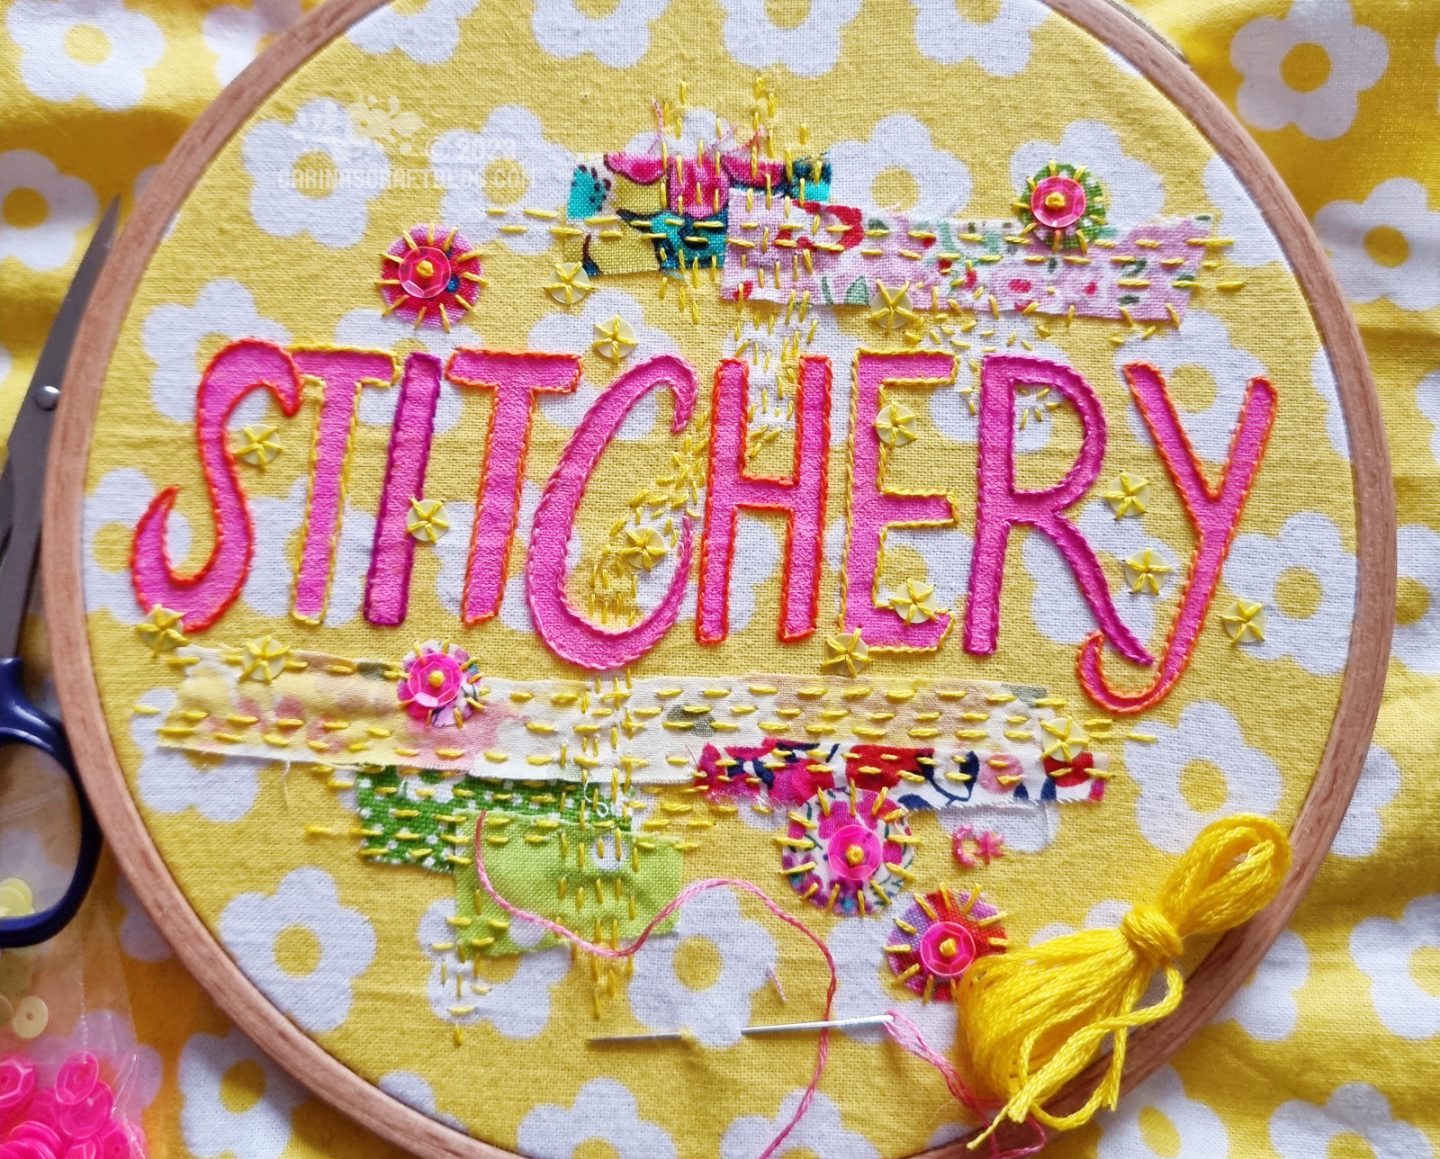 Yellow fabric with white flowers stretched in a wooden embroidery hoop. On the fabric is drawn the word stitchery in pink. Small patches of fabric in pink and green are attached to the fabric with stitches in yellow. There are pink and yellow sequins as embellishments.